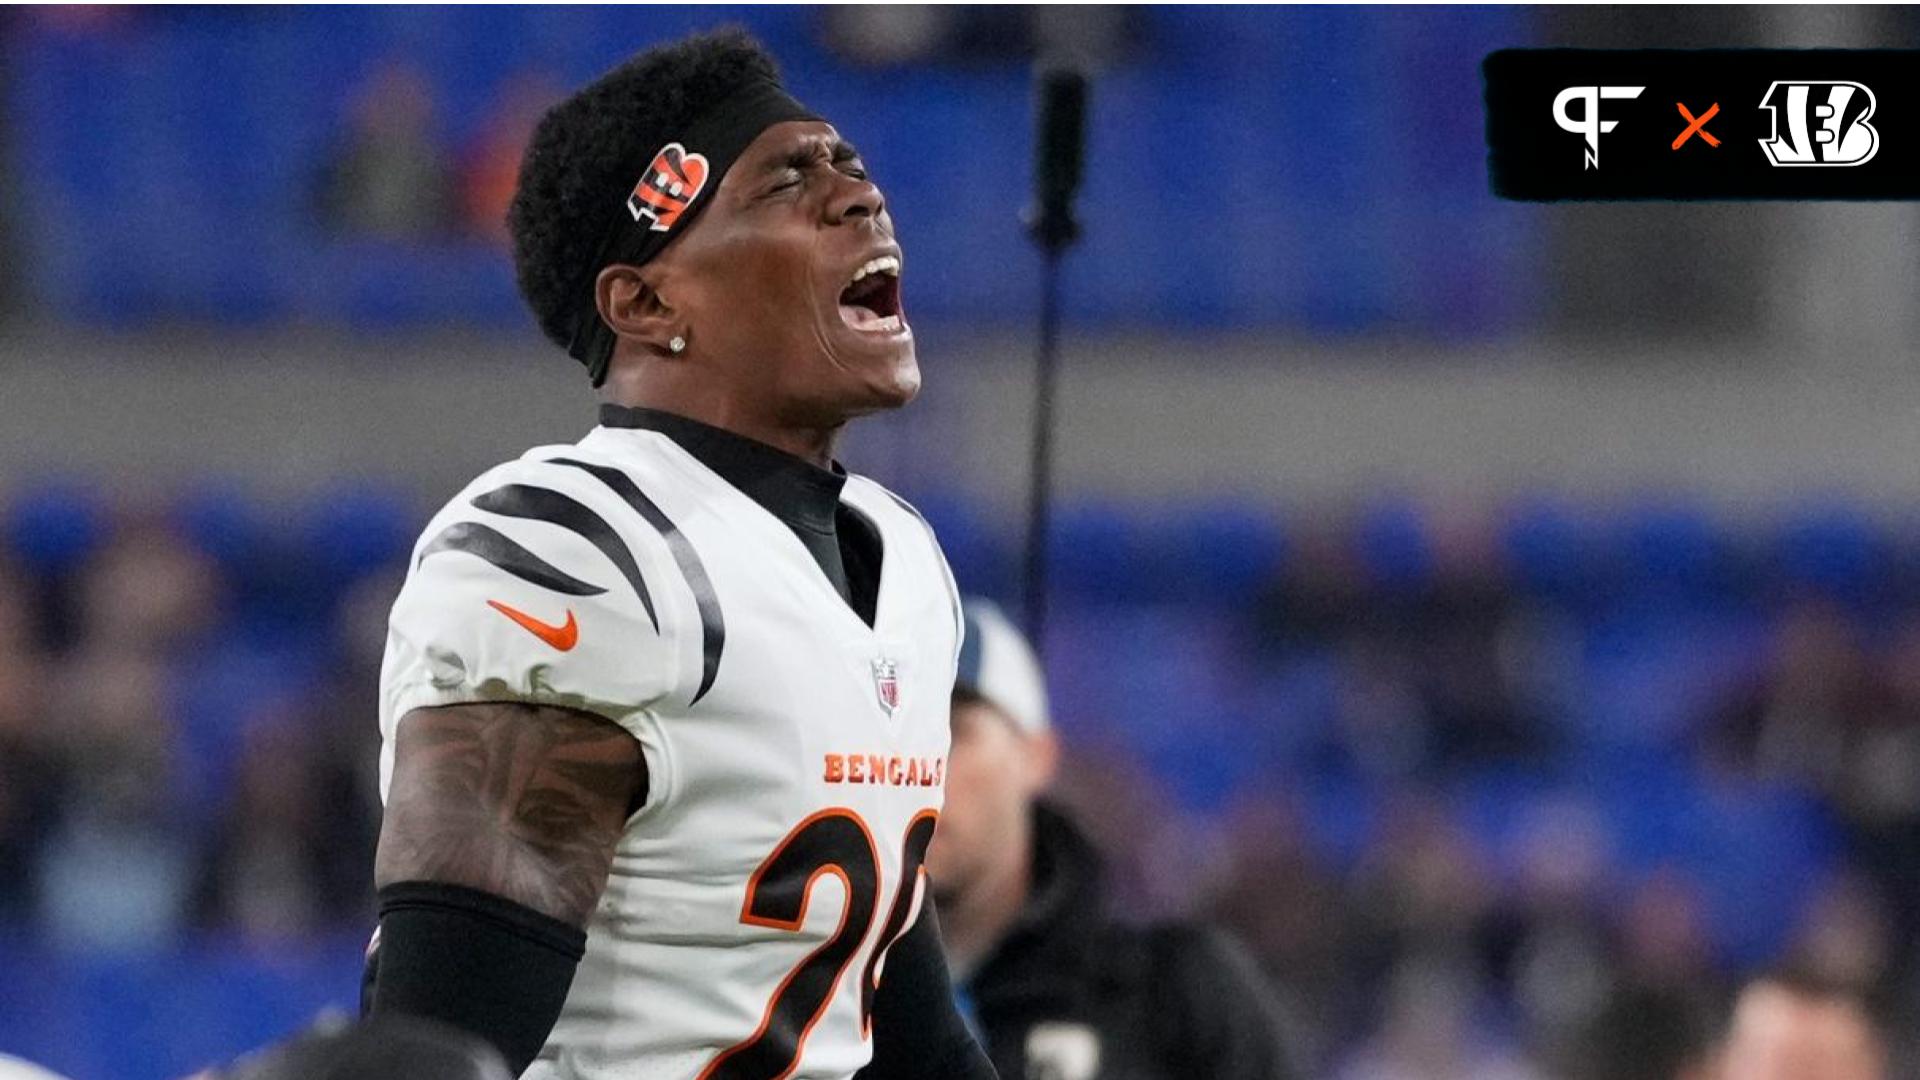 Cam Taylor-Britt (29) gets hype during warmups before the first quarter of the NFL Week 11 game between the Baltimore Ravens and the Cincinnati Bengals at M&T Bank Stadium.